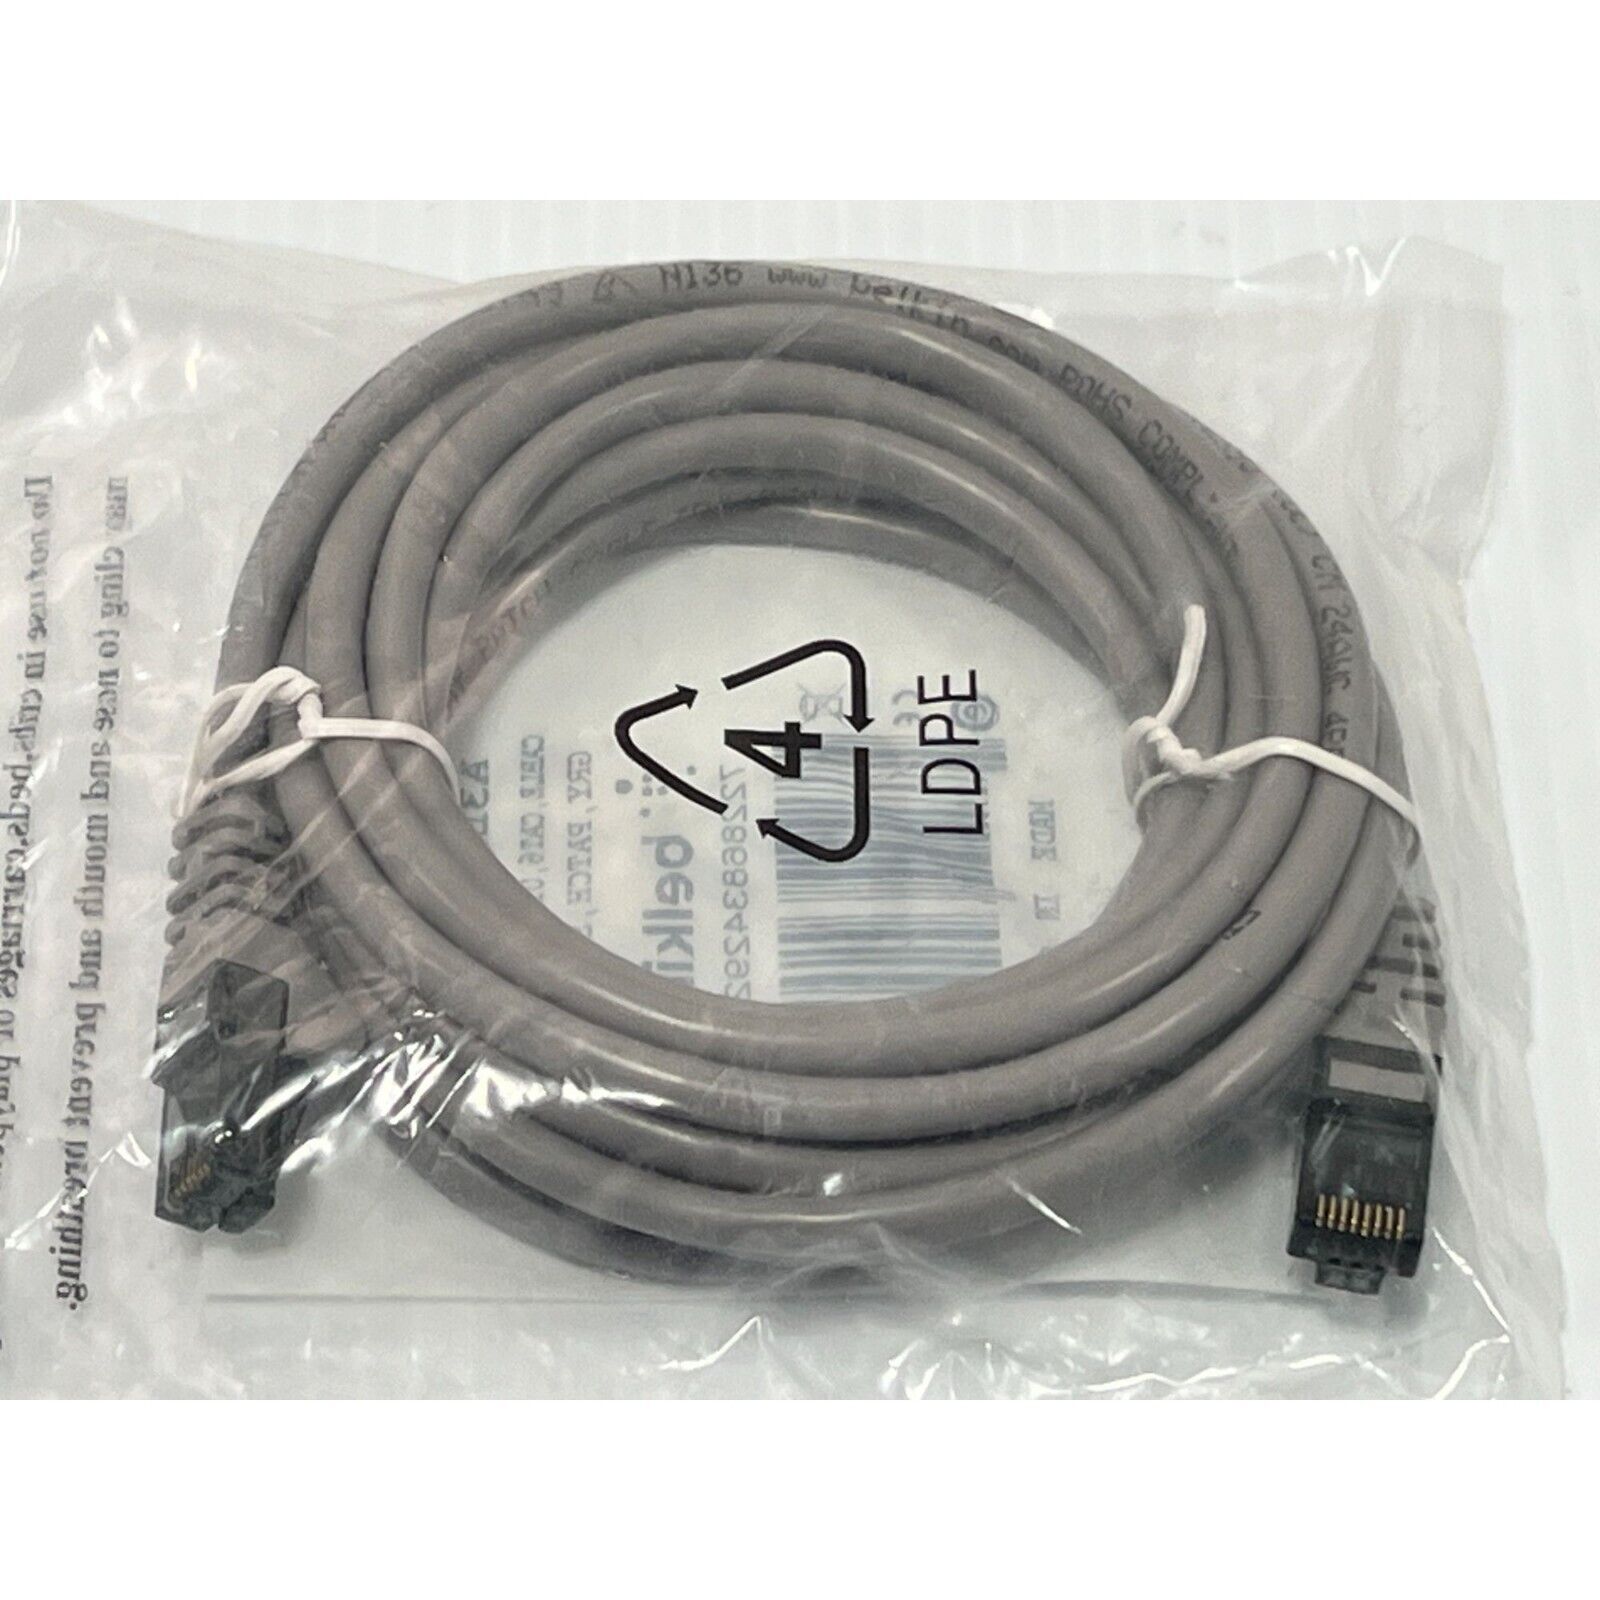 Belkin - A3L98010S - Cable - Cat6-UTP - RJ45M/M - Gray - Patch - Snagless